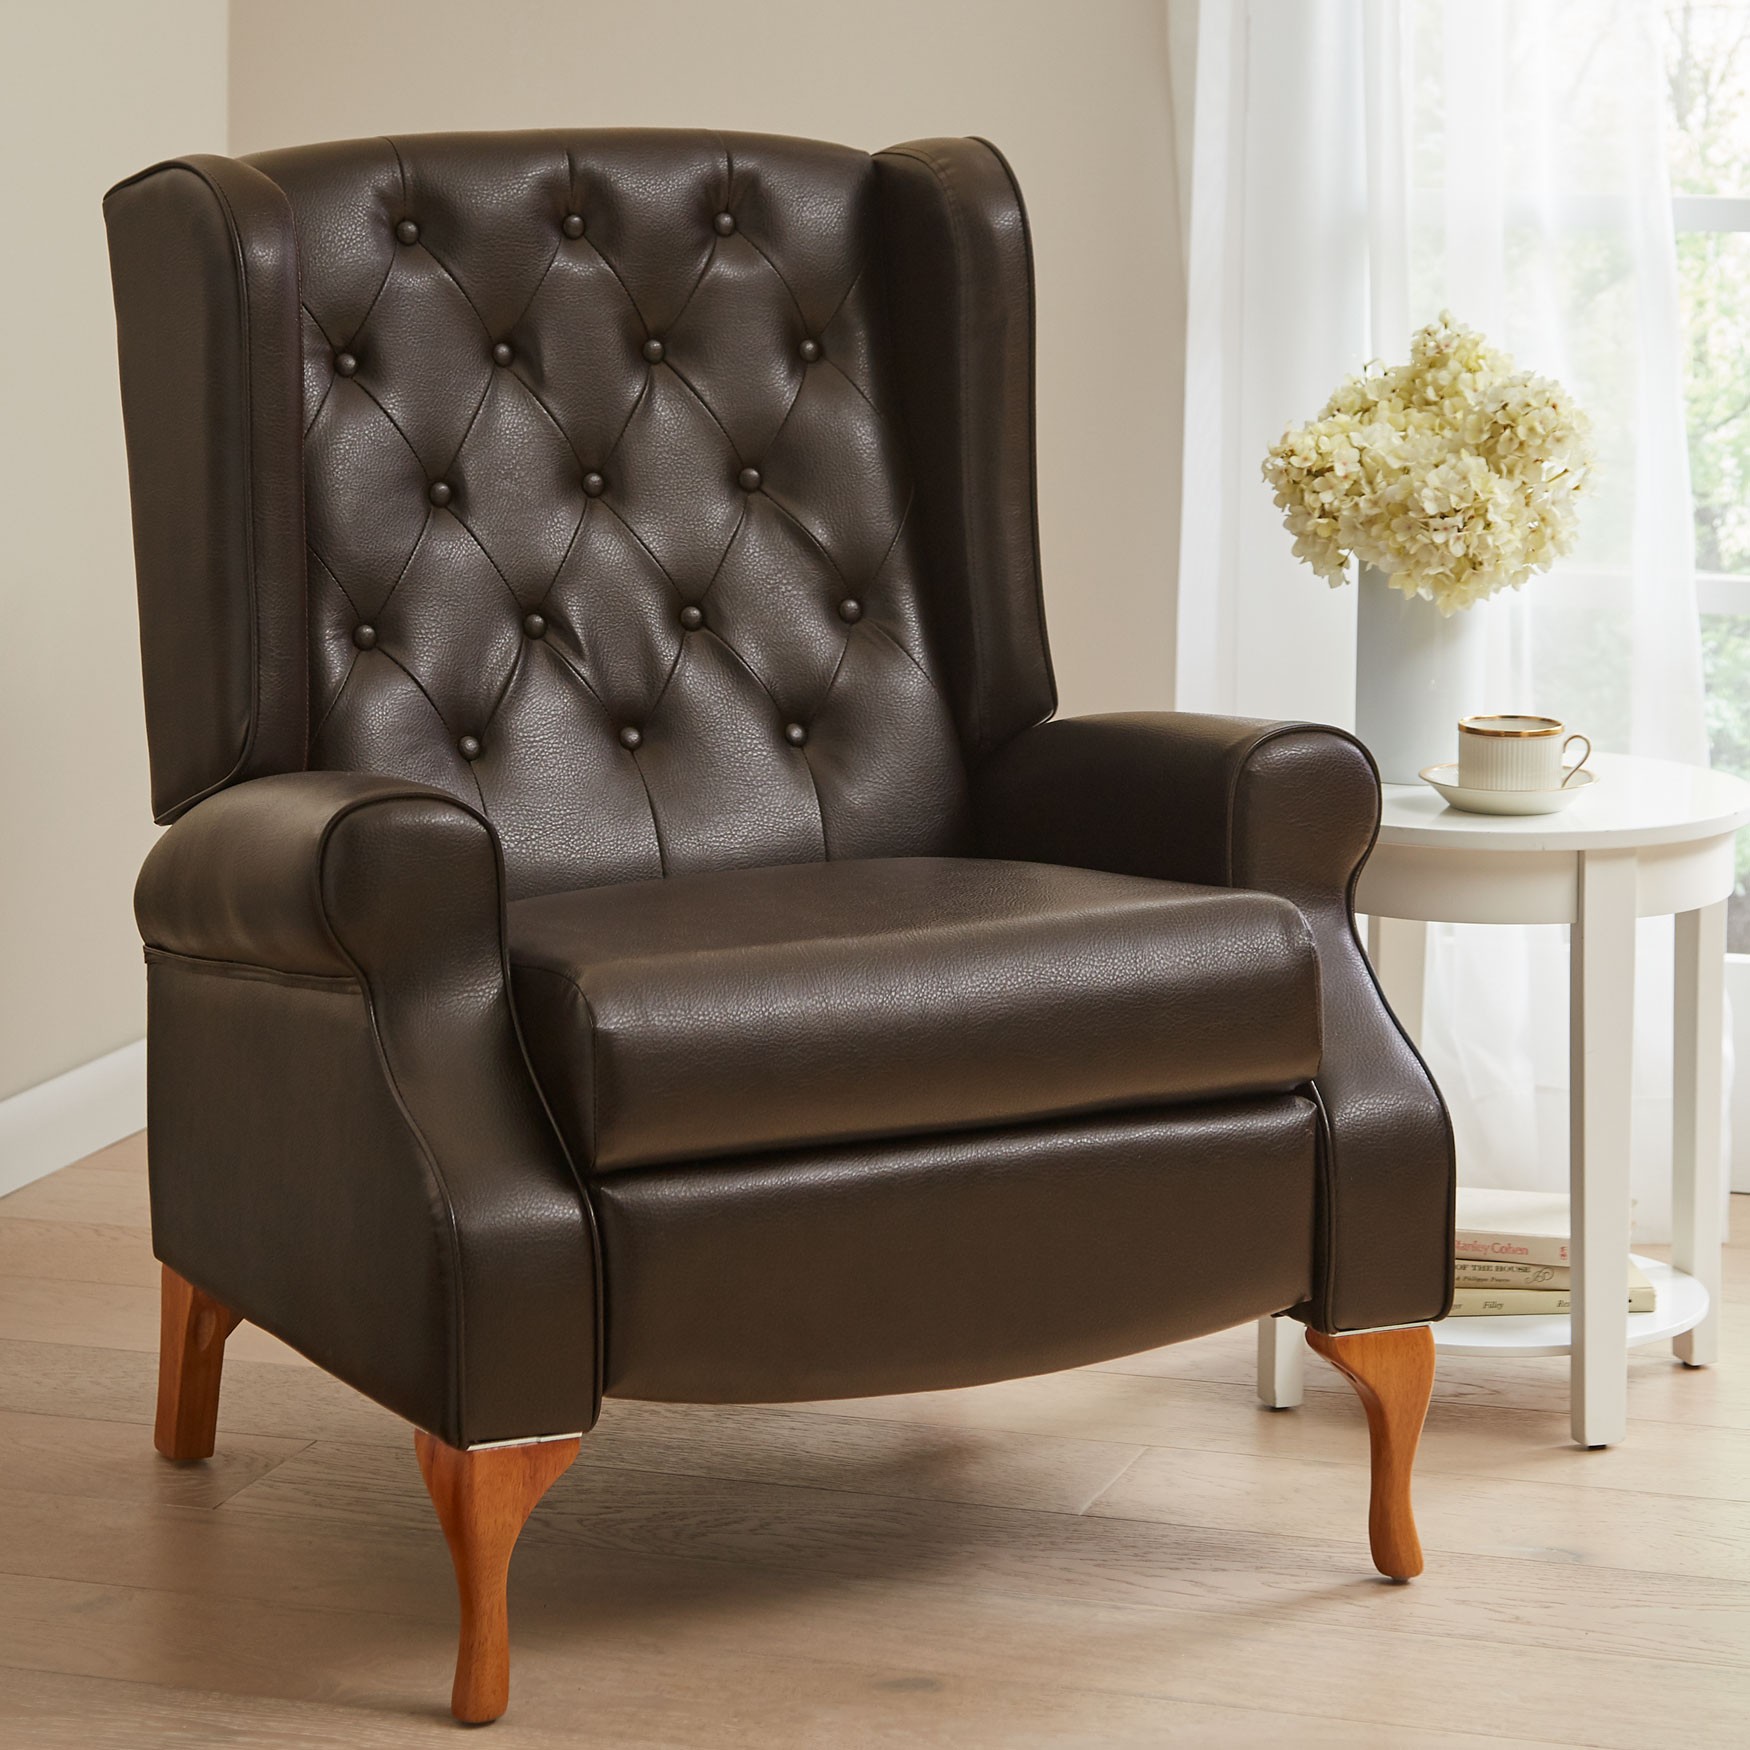 Oversized queen anne style tufted wingback recliner